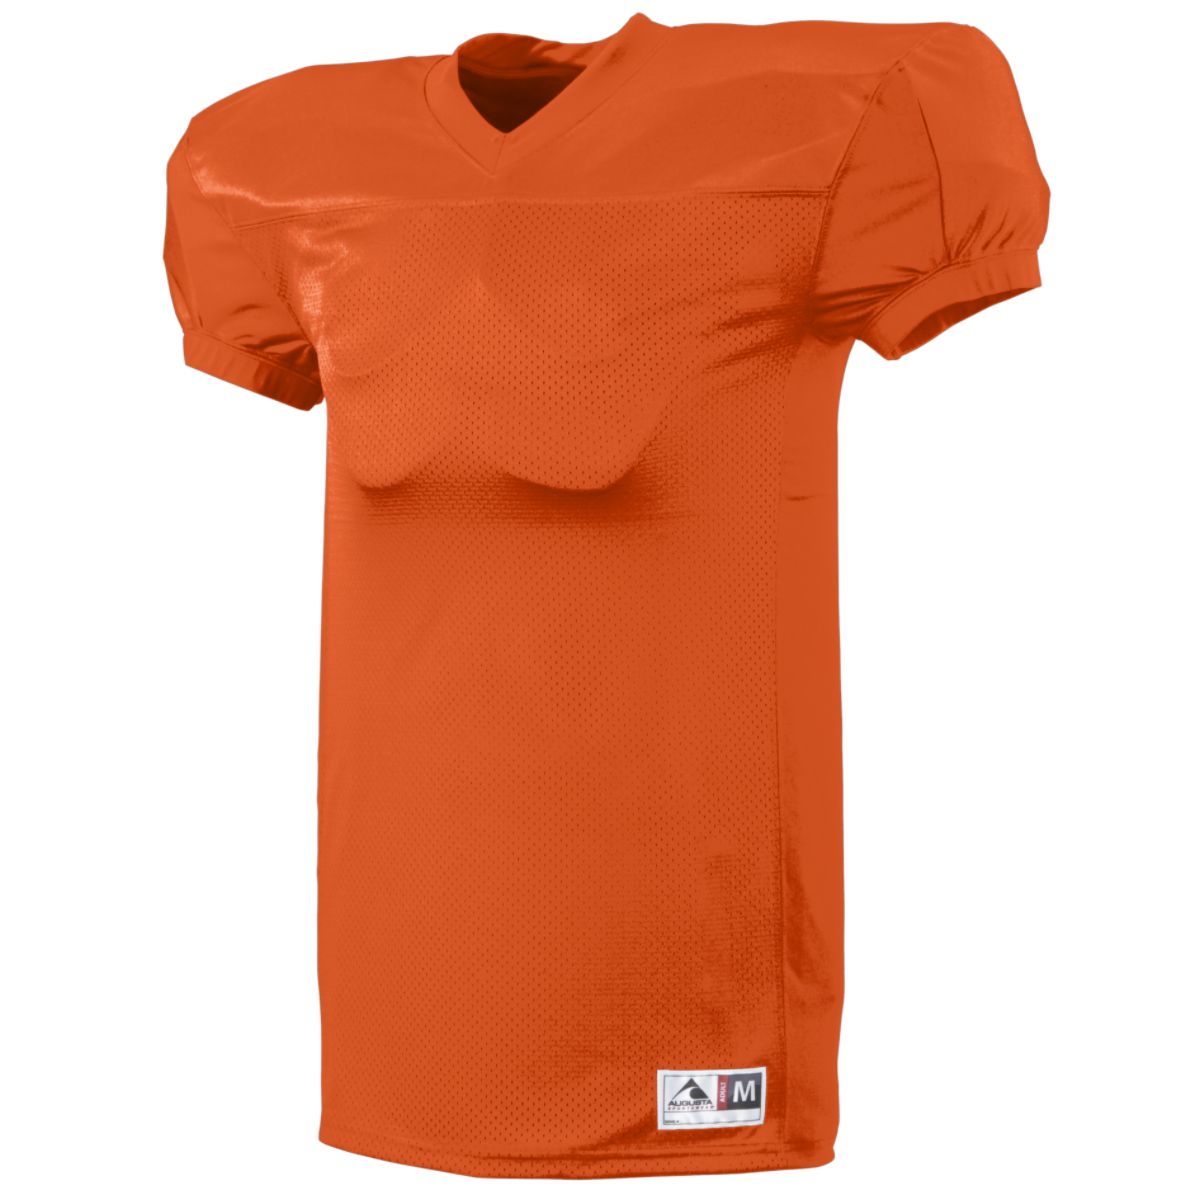 Augusta Sportswear Scrambler Jersey in Orange  -Part of the Adult, Adult-Jersey, Augusta-Products, Football, Shirts, All-Sports, All-Sports-1 product lines at KanaleyCreations.com